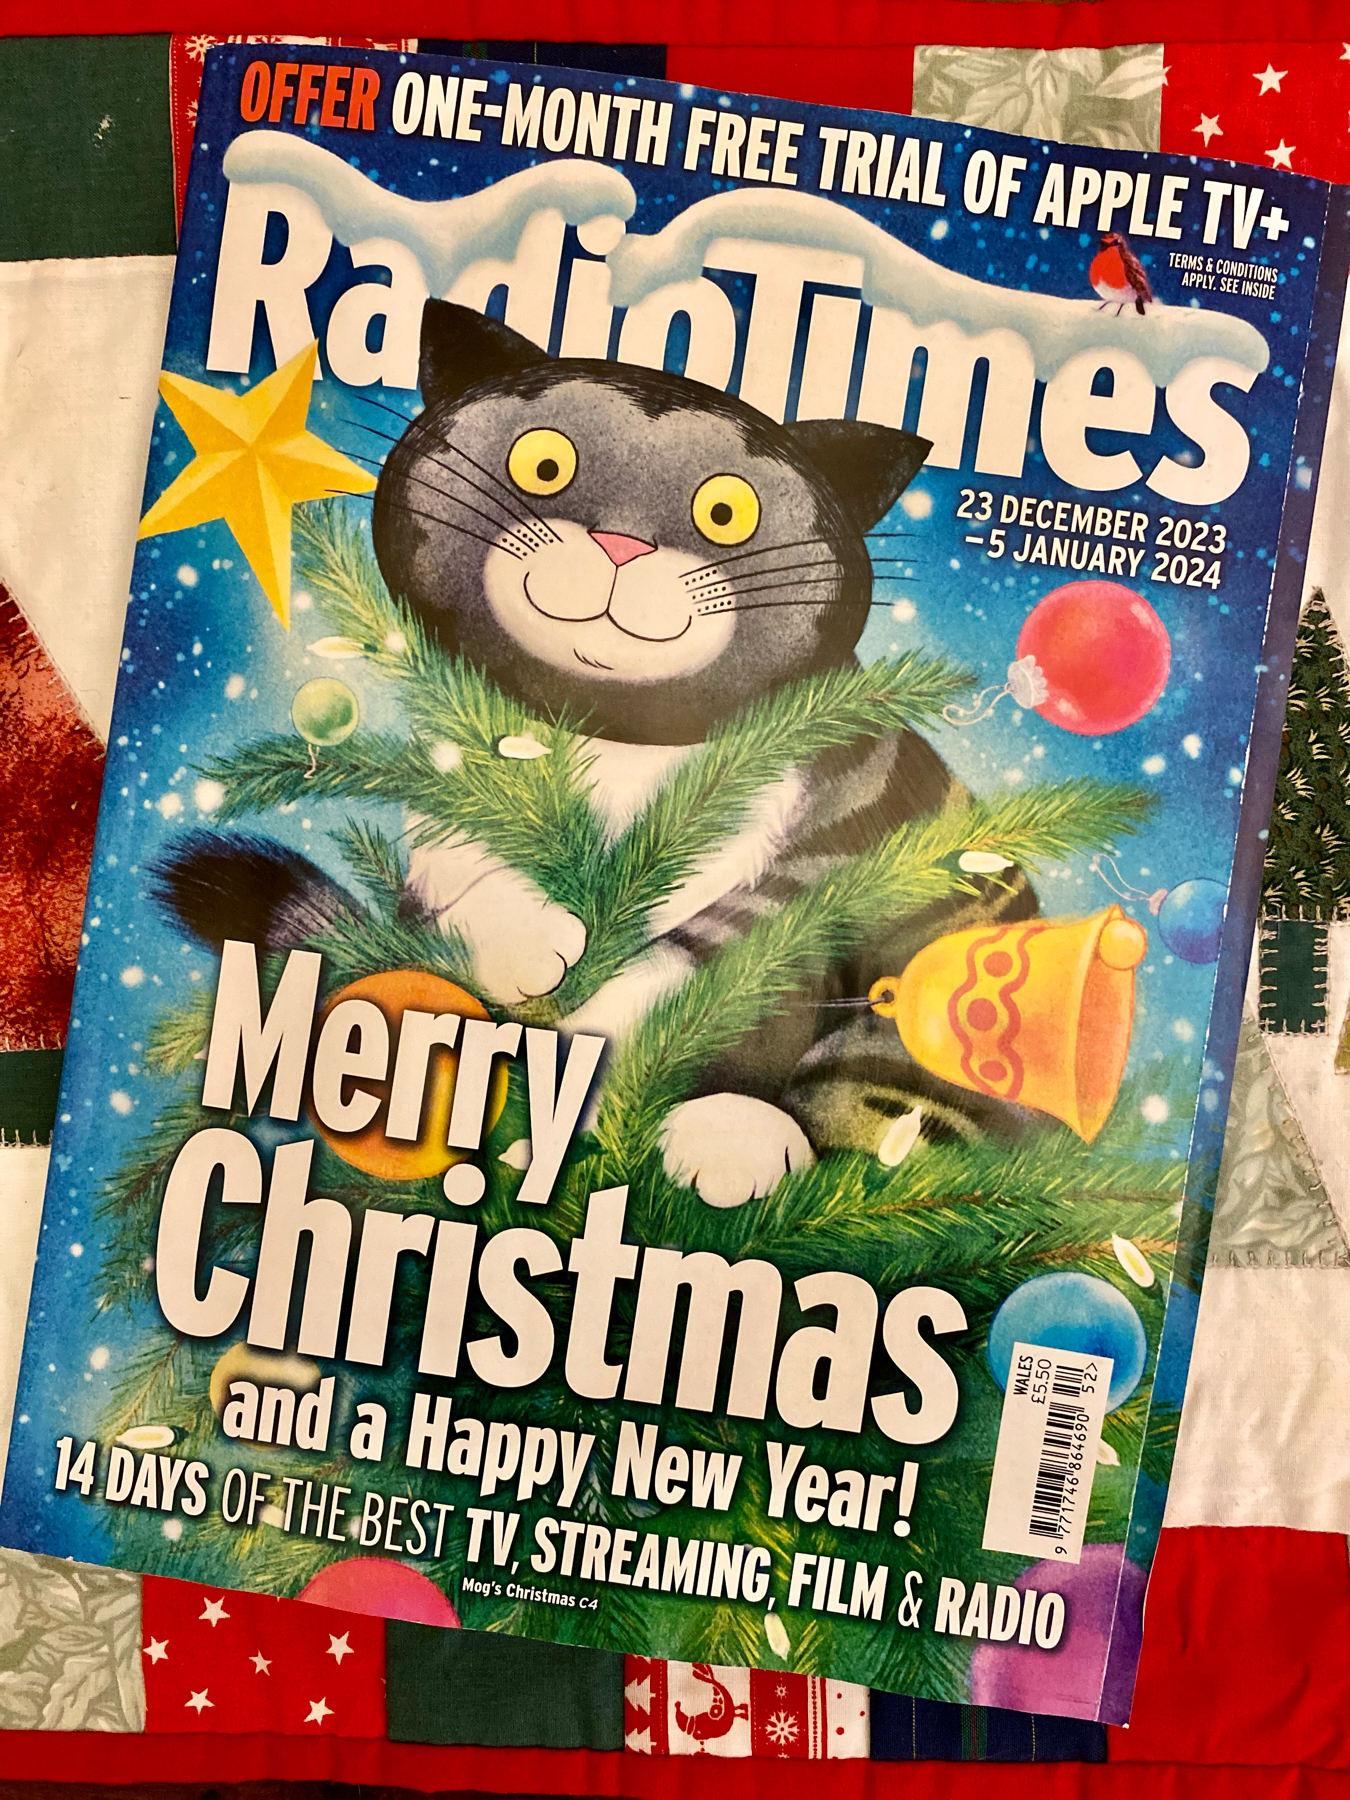 A festive Radio Times magazine cover with dates December 23, 2023, to January 5, 2024, featuring a cartoon illustration of a black and white cat on a decorated Christmas tree.